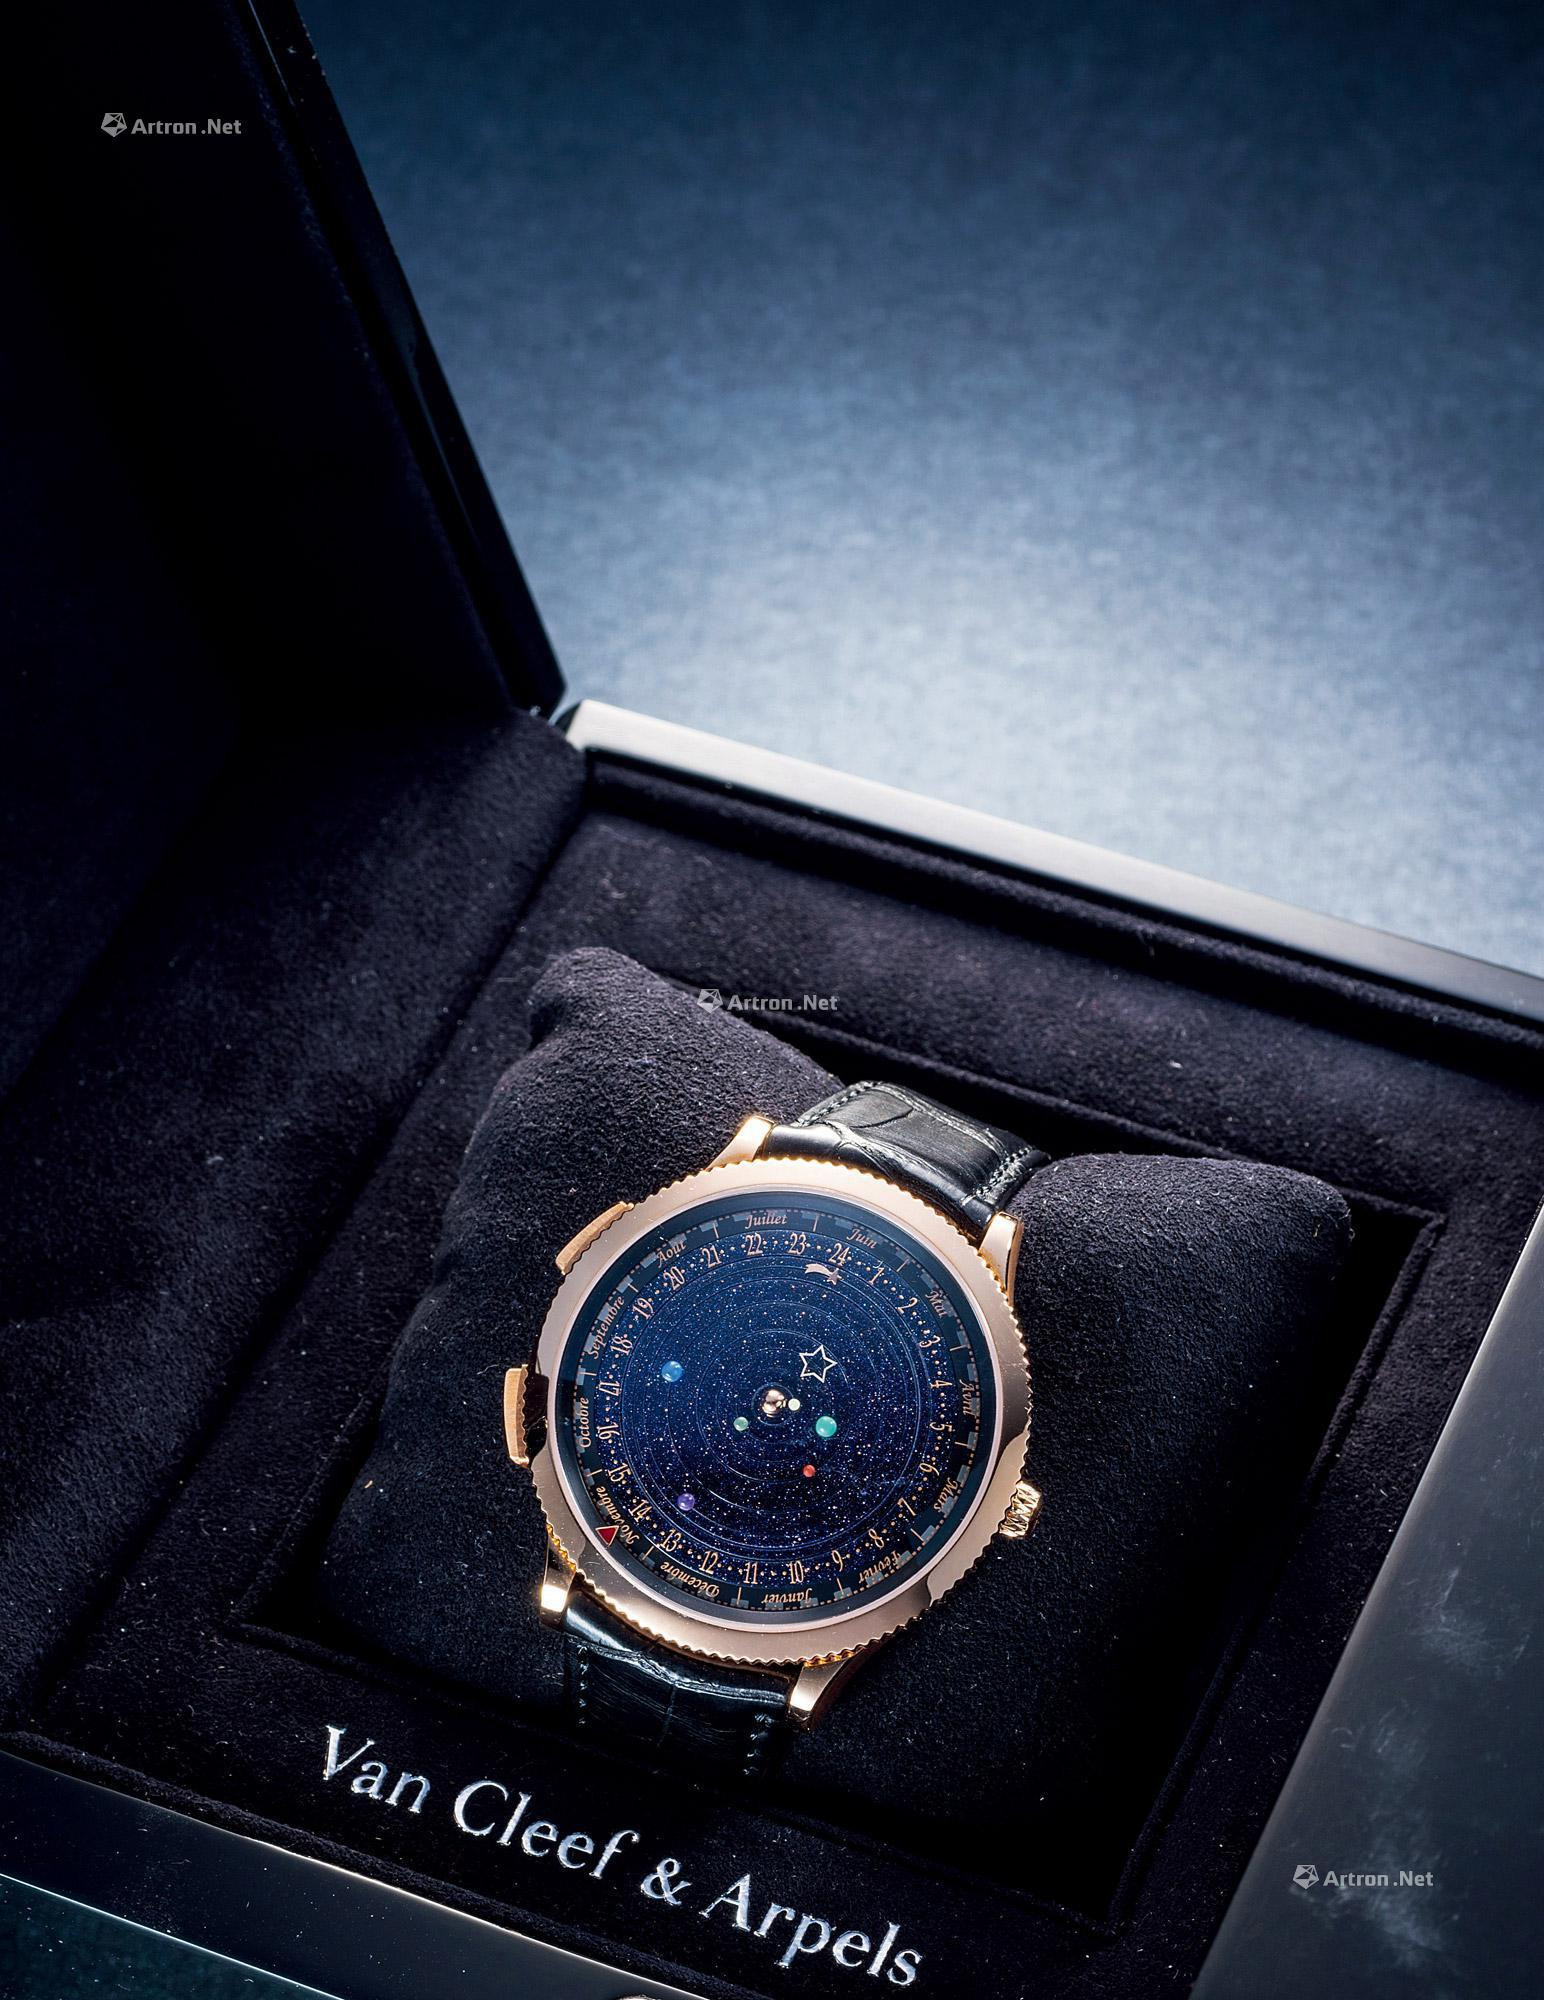 VAN CLEEF & ARPELS  A VERY RARE AND ELEGANT ROSE GOLD AUTOMATIC SOLAR SYSTEM WRISTWATCH， WITH 24 HOUR， DATE， MONTH AND YEAR INDICATION， PRESENTATION BOX